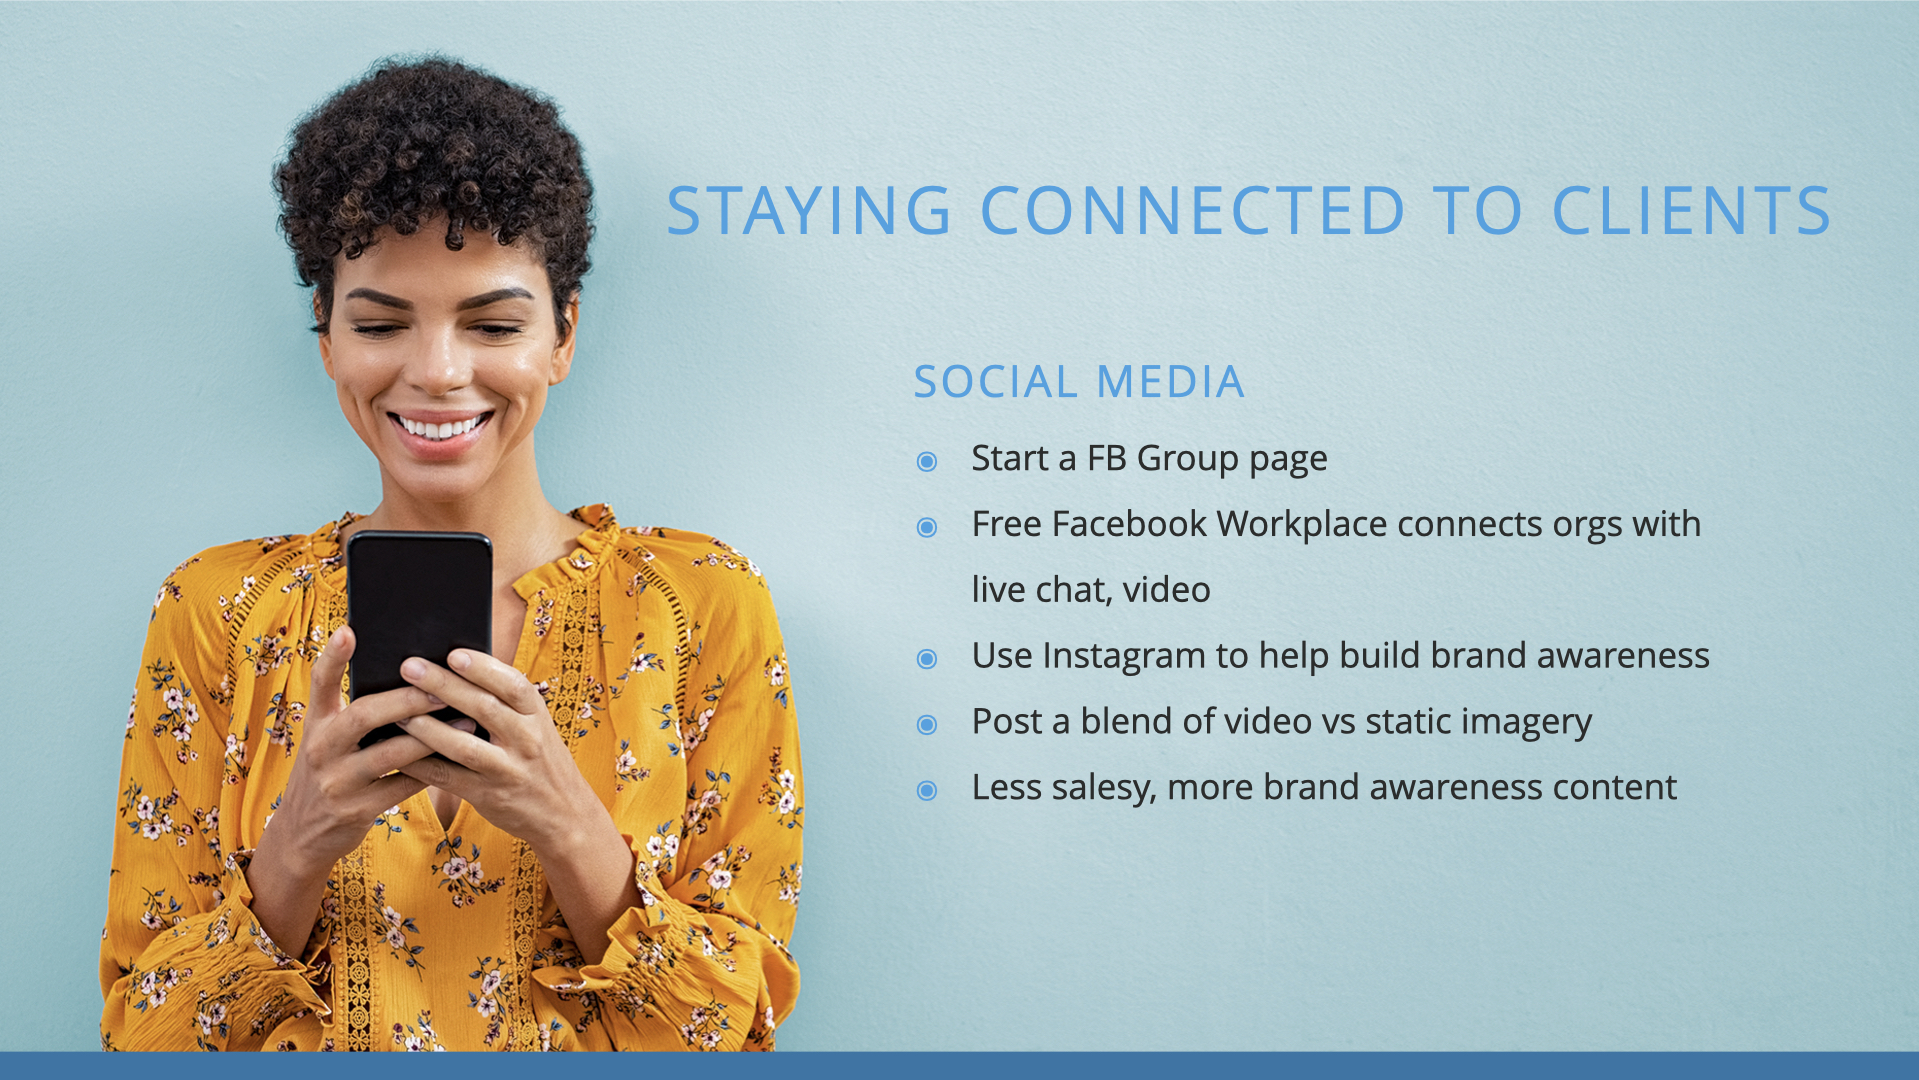 Stay Connected to Clients with Social Media